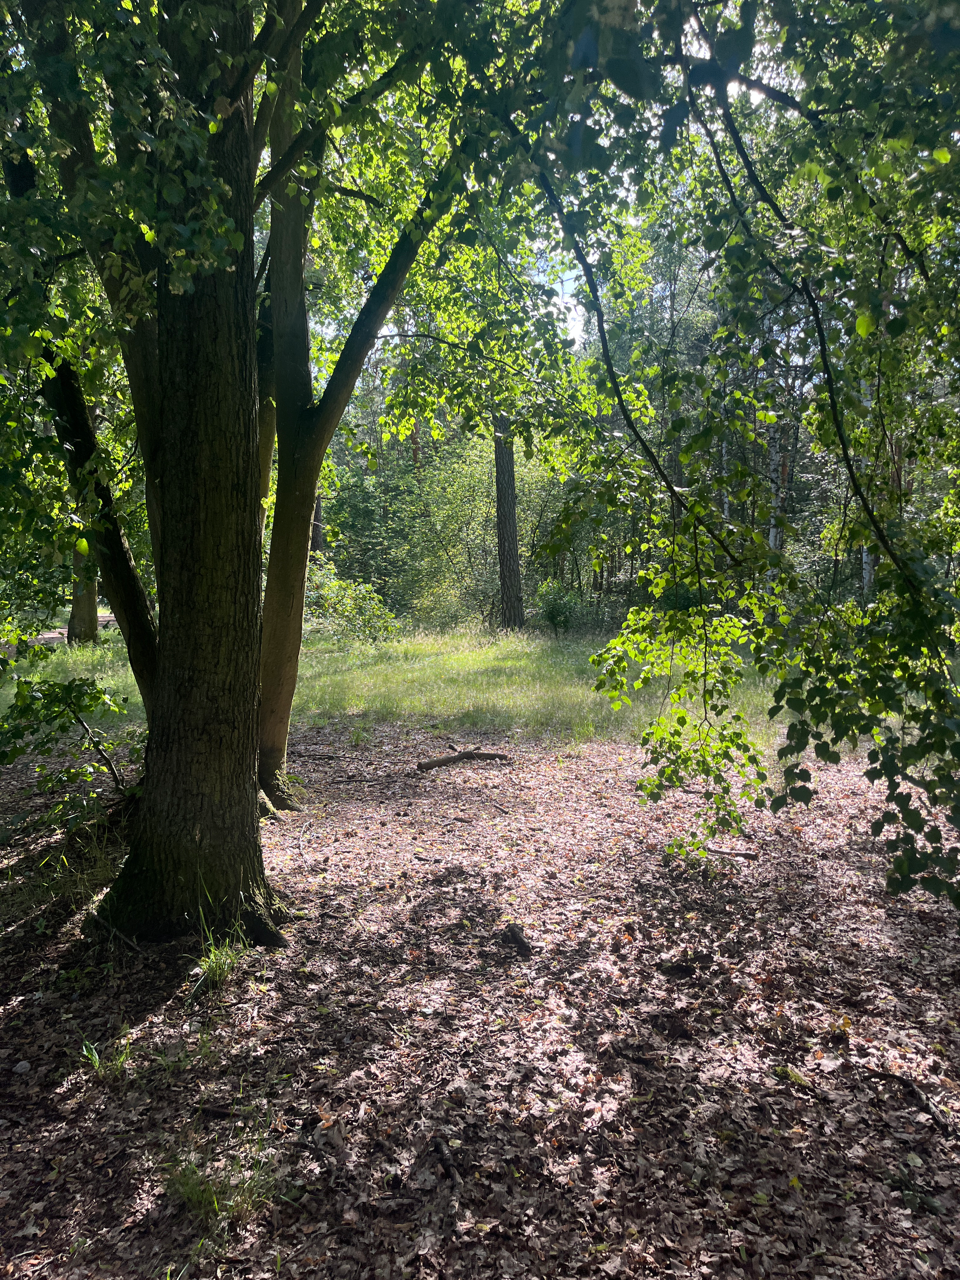 A picture of a path through the forest with dappled sunlight streaming in